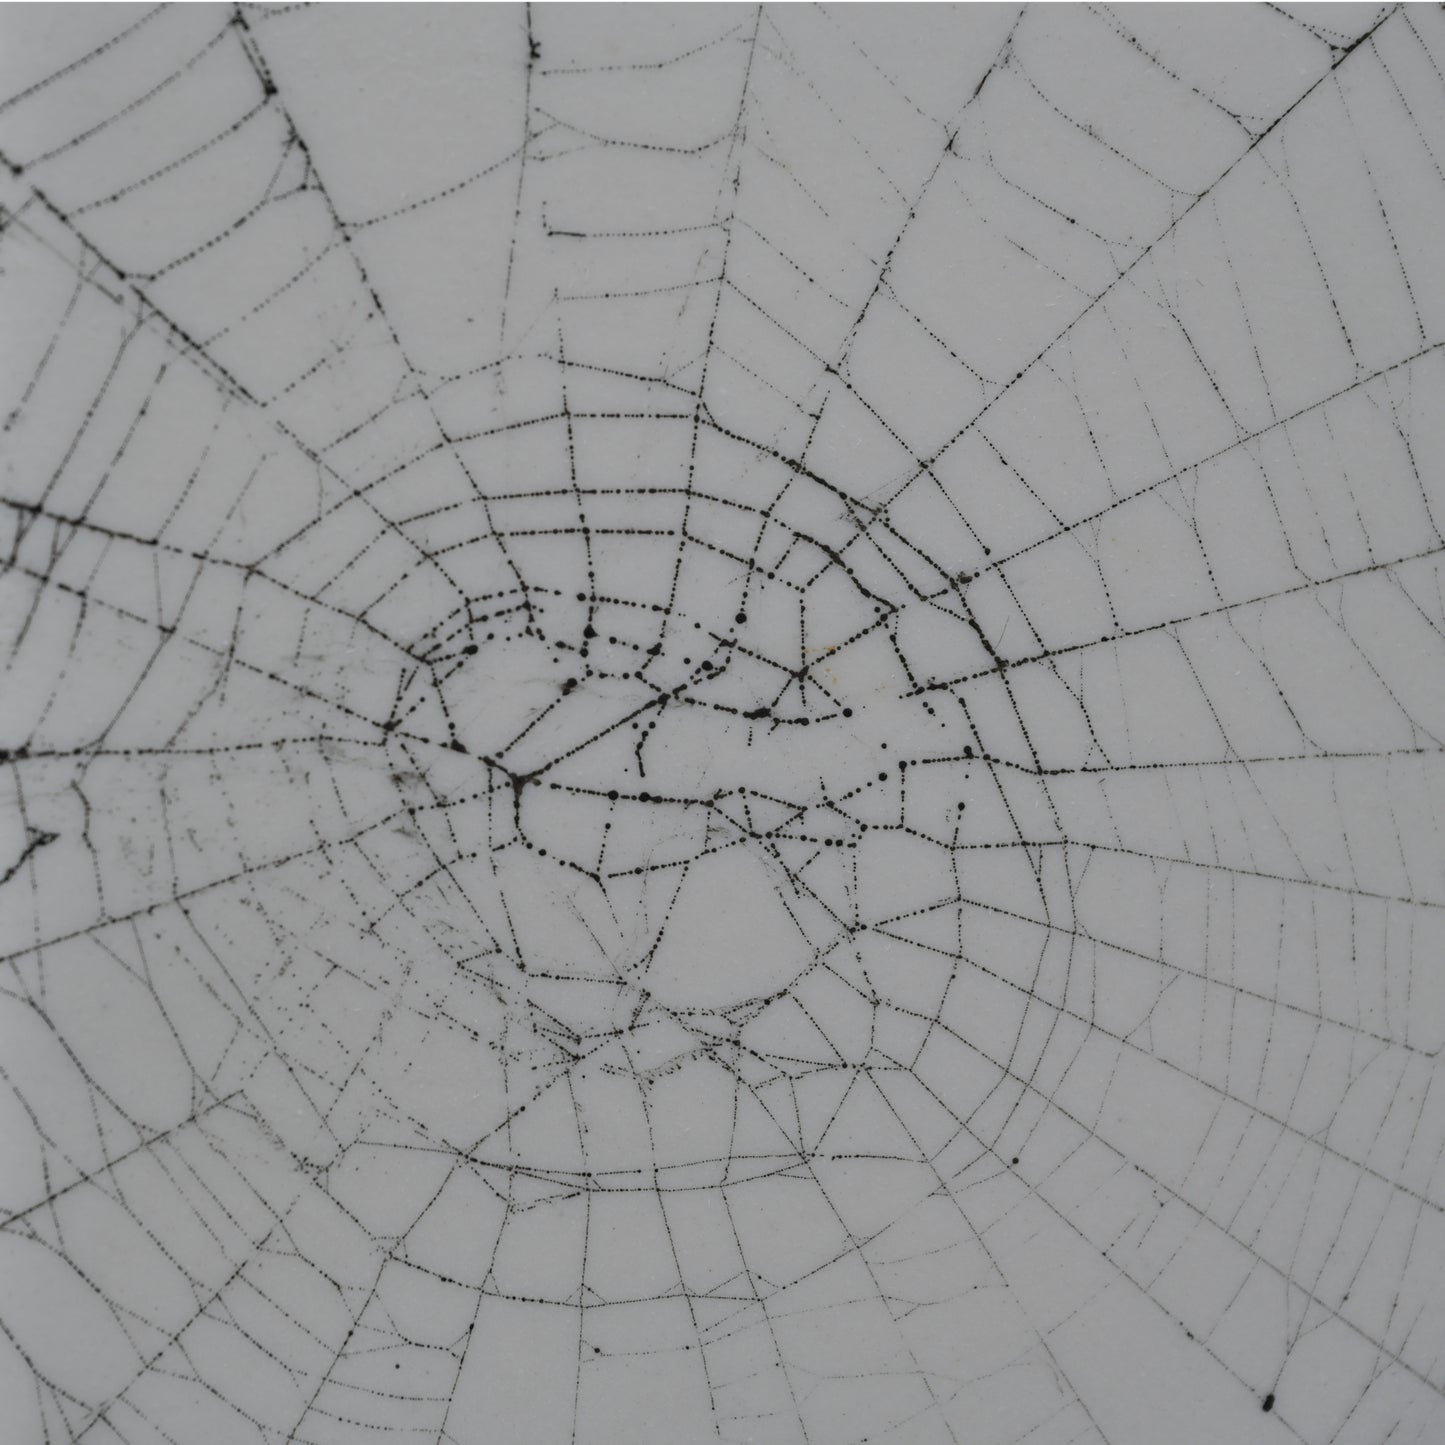 Web on Clay (131), Collected August 25, 2022